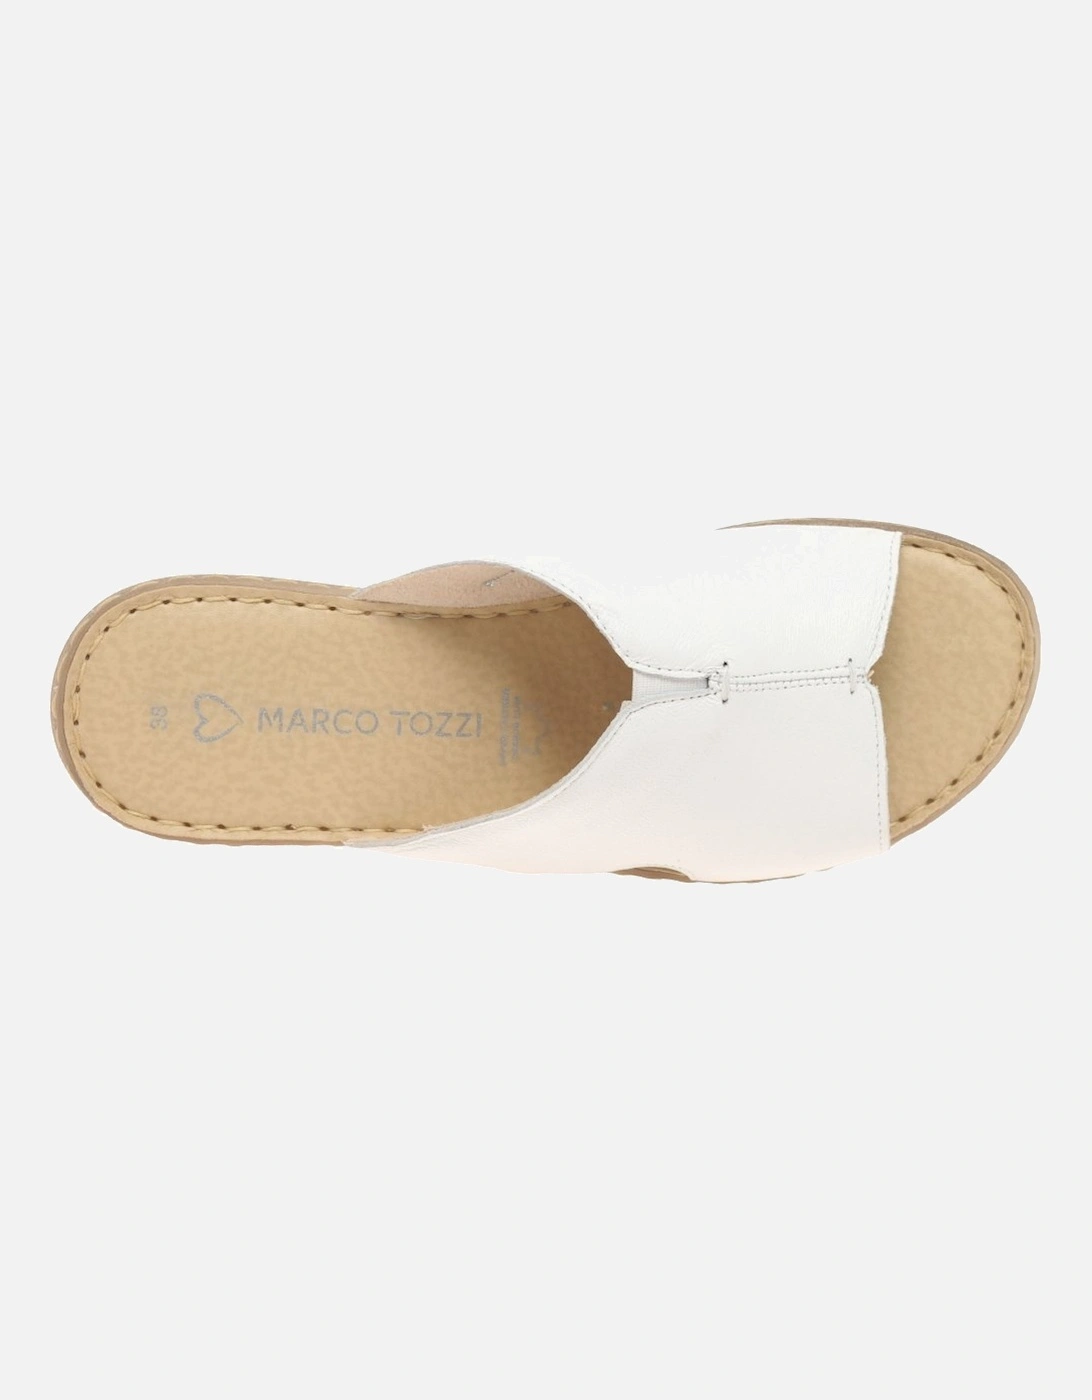 Require Womens Mule Sandals